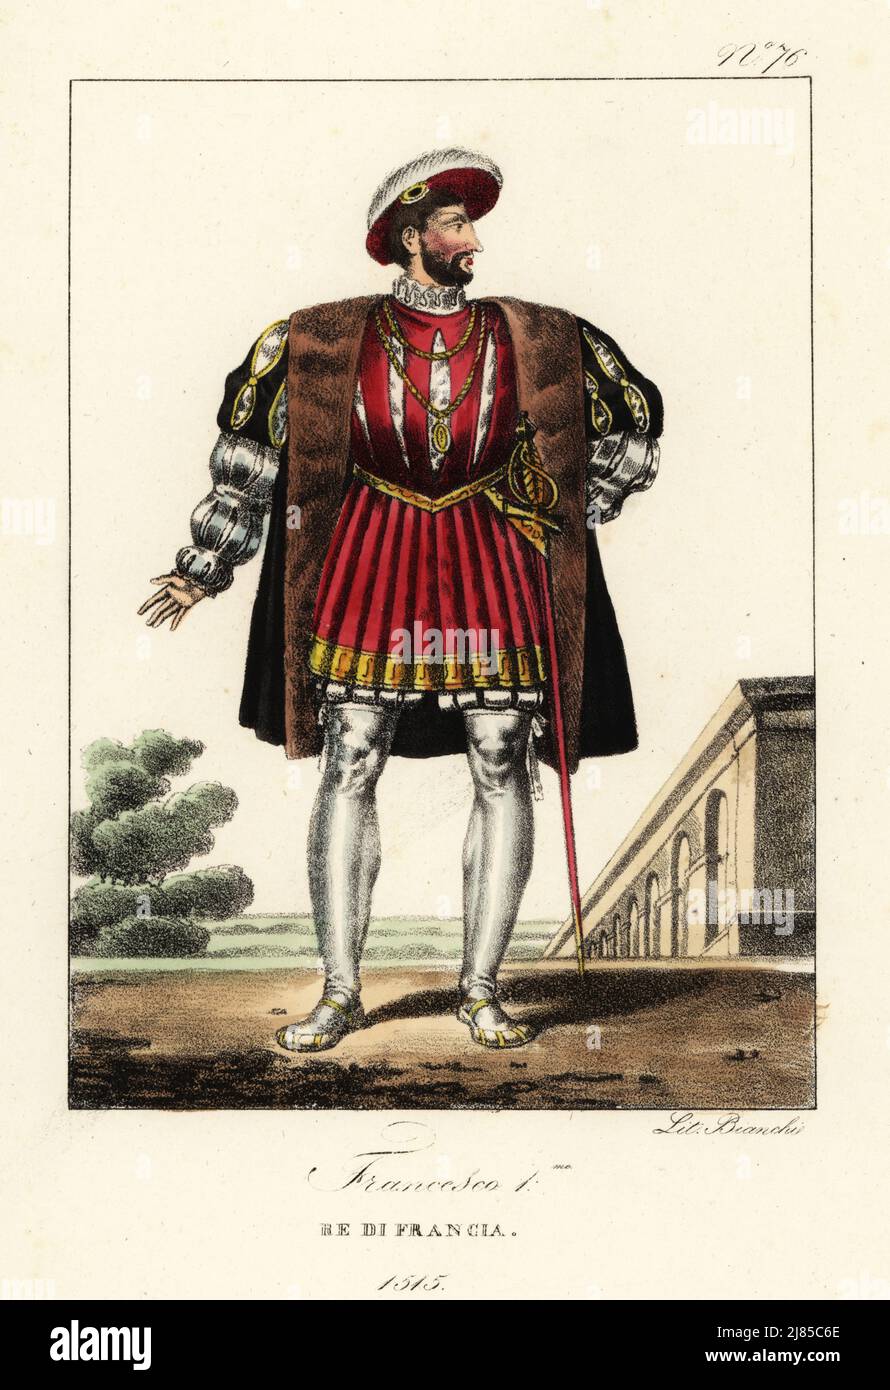 Francis I, King of France, 1515. In bejeweled cap, fur-lined slashed mantle, slashed doublet, hose, with court sword. Francois I, Roi de France. Handcoloured lithograph by Lorenzo Bianchi after Hippolyte Lecomte from Costumi civili e militari della monarchia francese dal 1200 al 1820, Naples, 1825. Italian edition of Lecomte’s Civilian and military costumes of the French monarchy from 1200 to 1820. Stock Photo